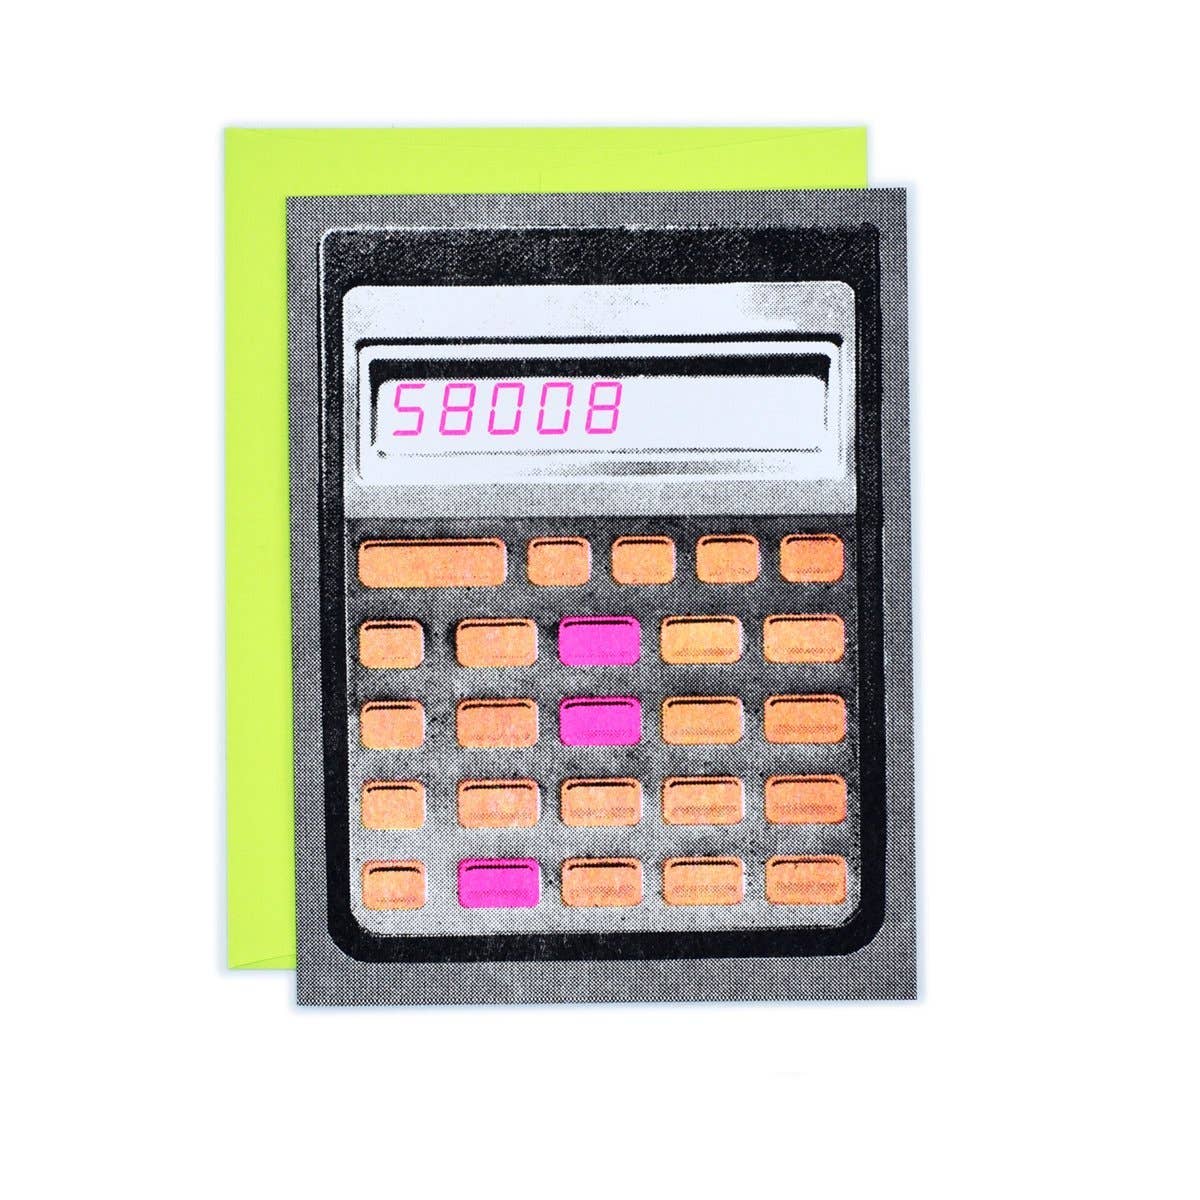 Black background with image of calculator with orange and hot pink keys and in hot pink text screen says,, "58008". Neon green envelope included. 